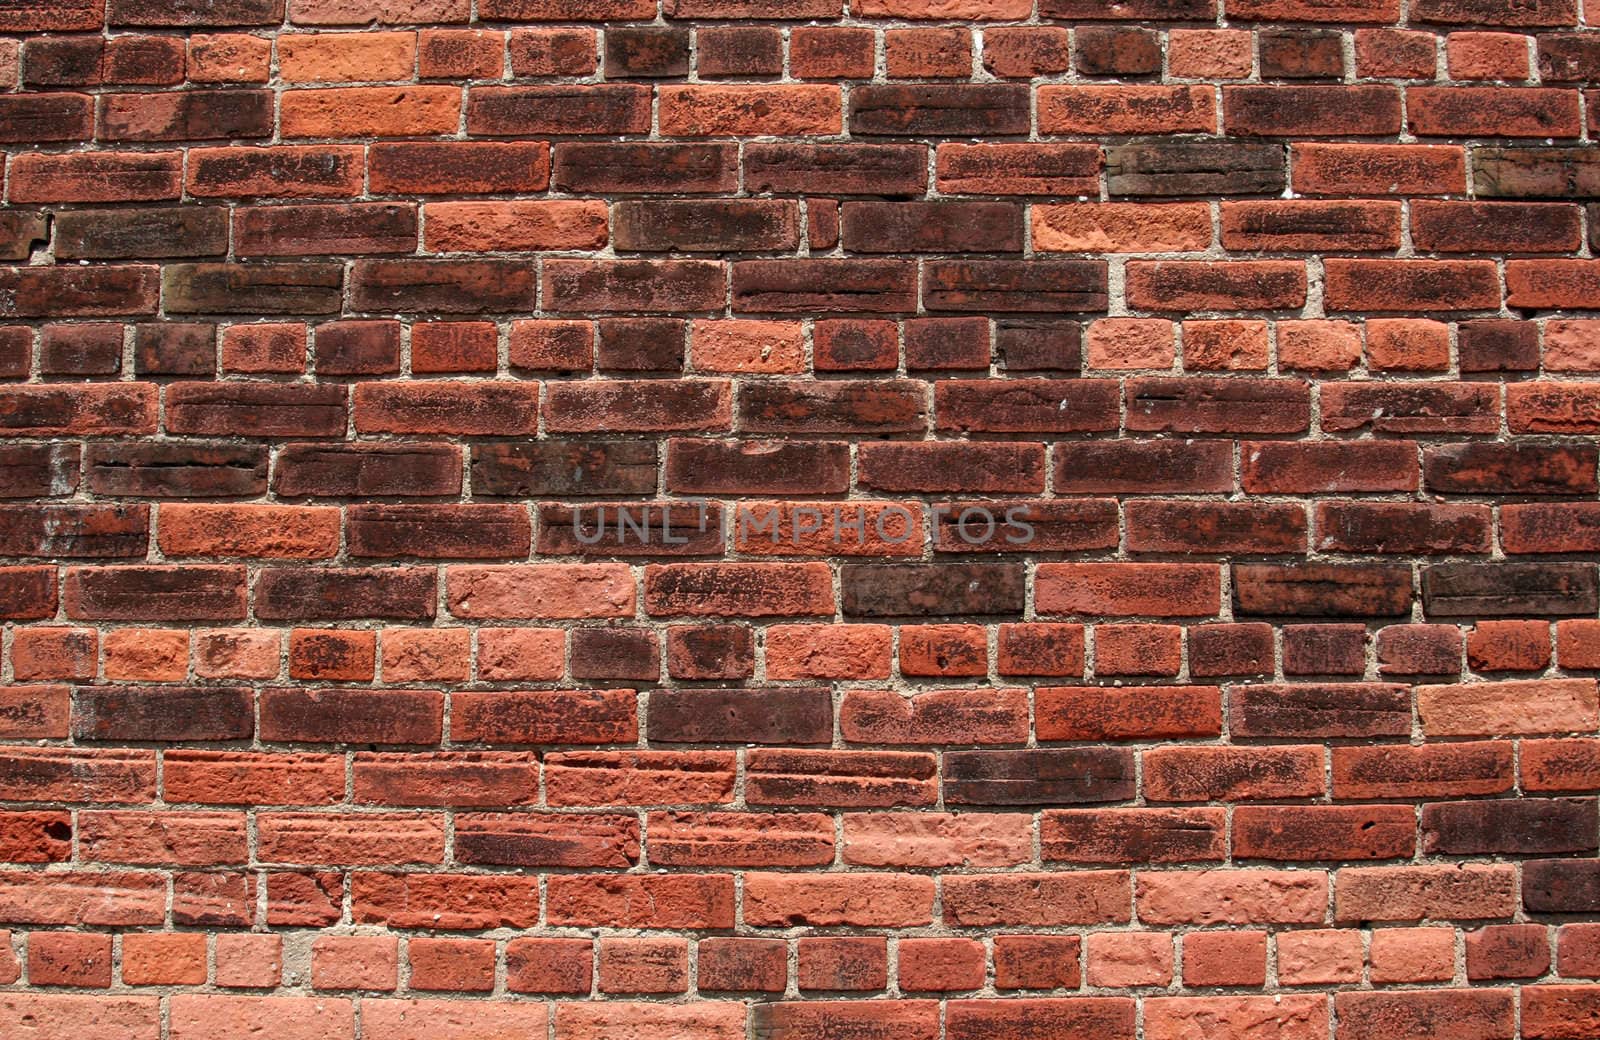 An old red brick wall background.
